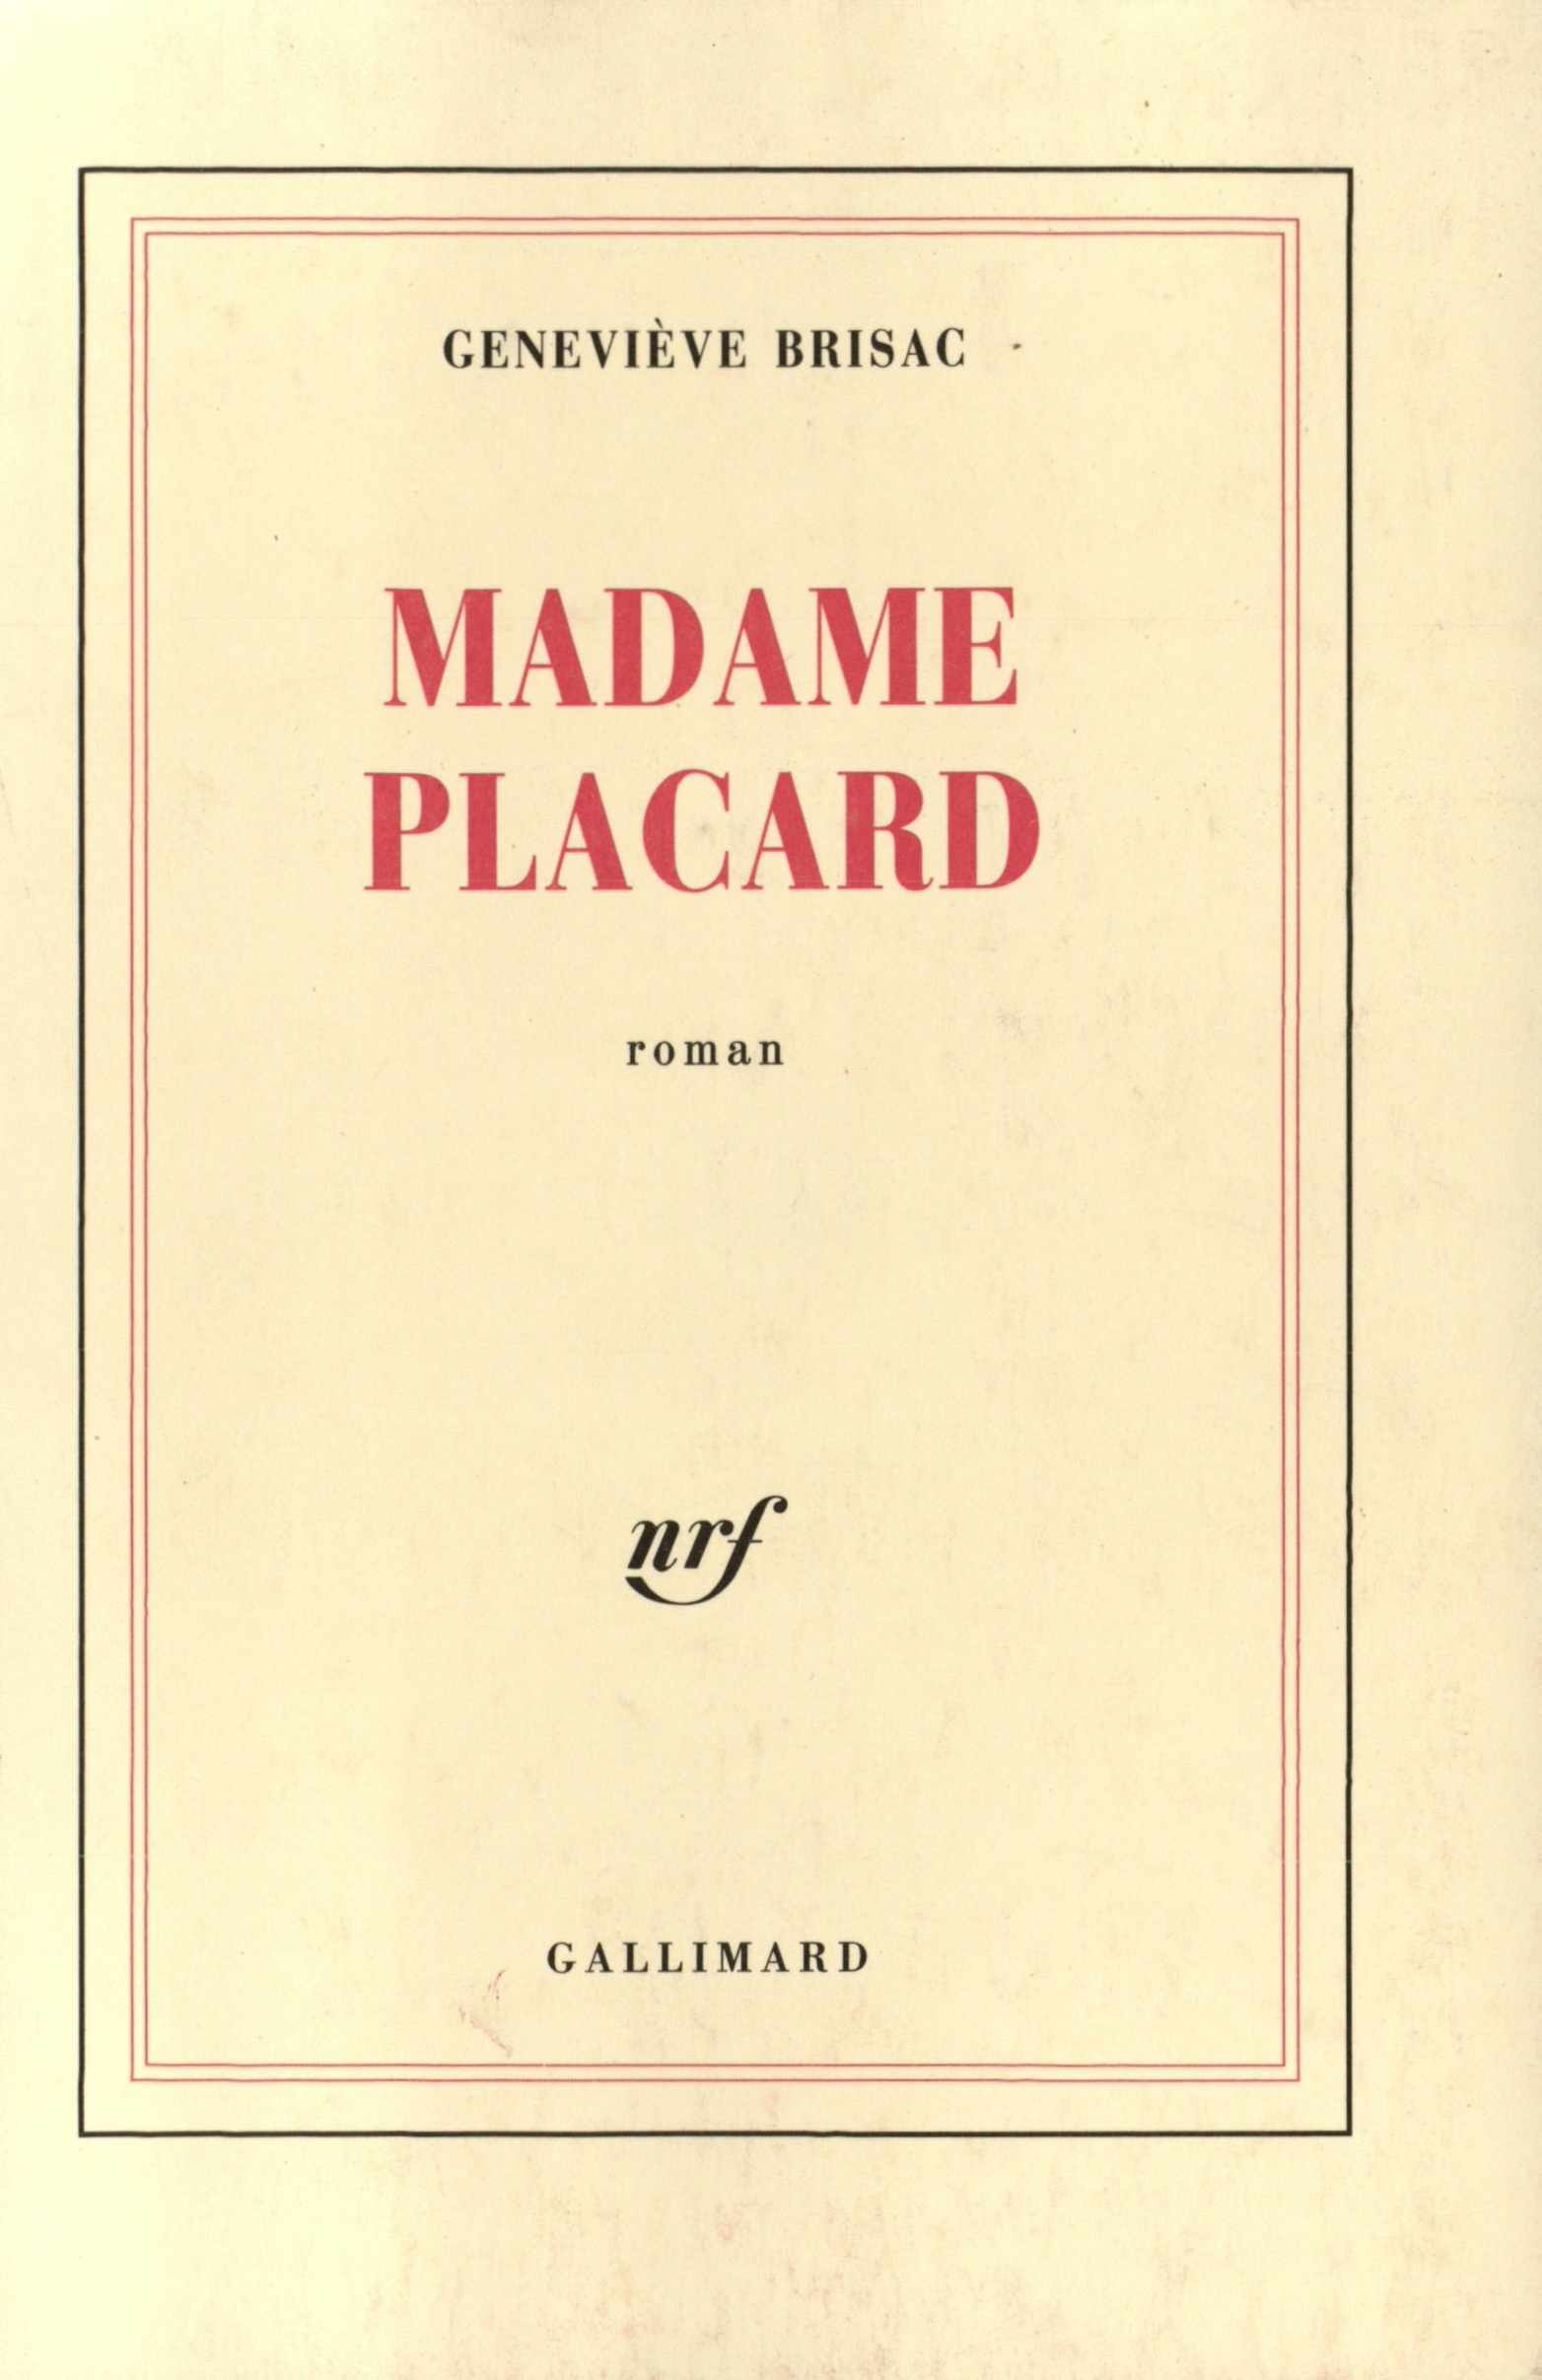 Madame placard (9782070716937-front-cover)